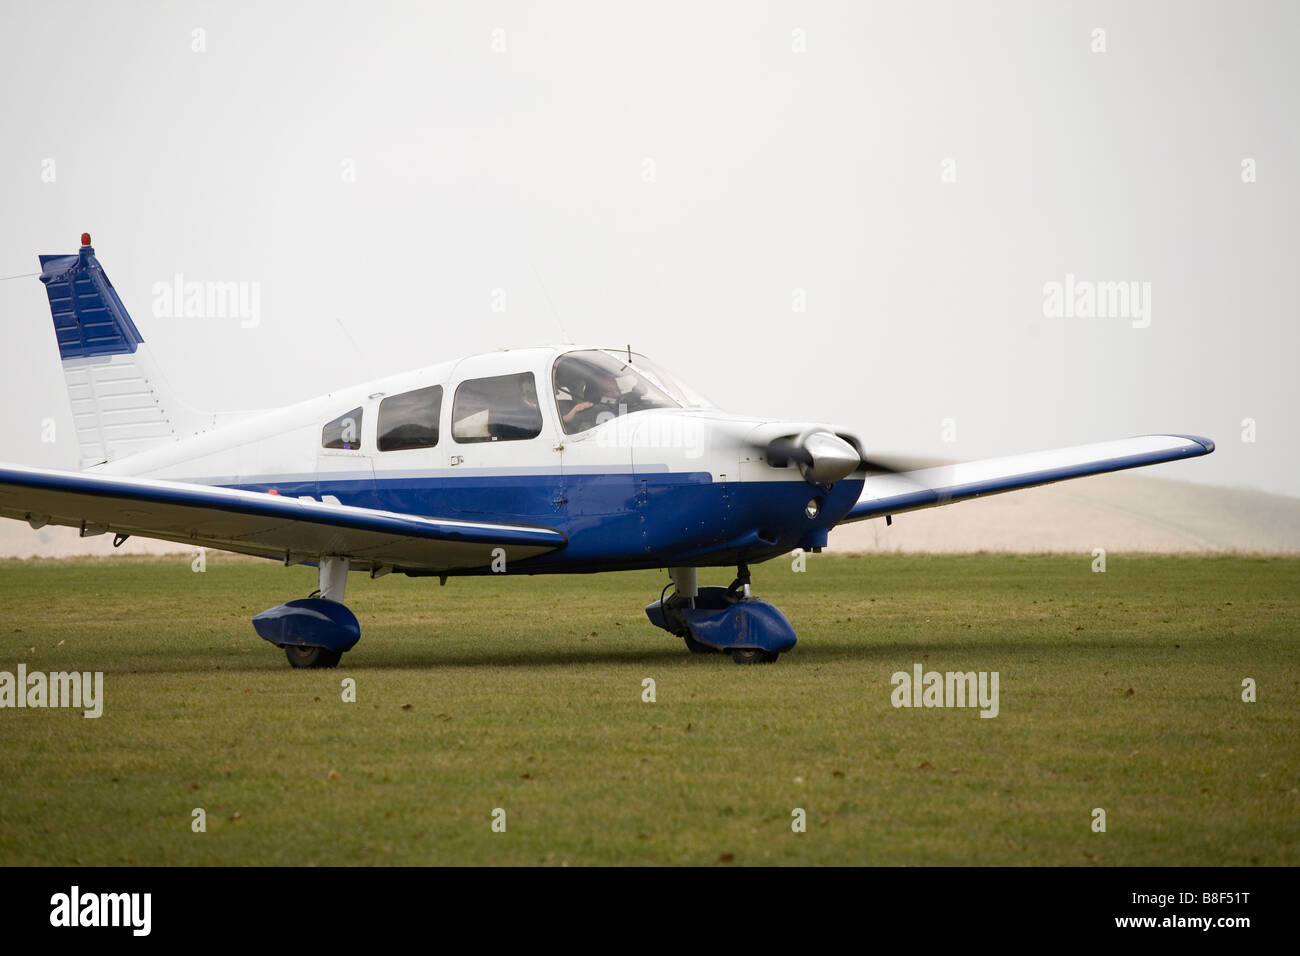 Aircraft Airplane Flying Lessons Plane Pre-flight Stock Photo